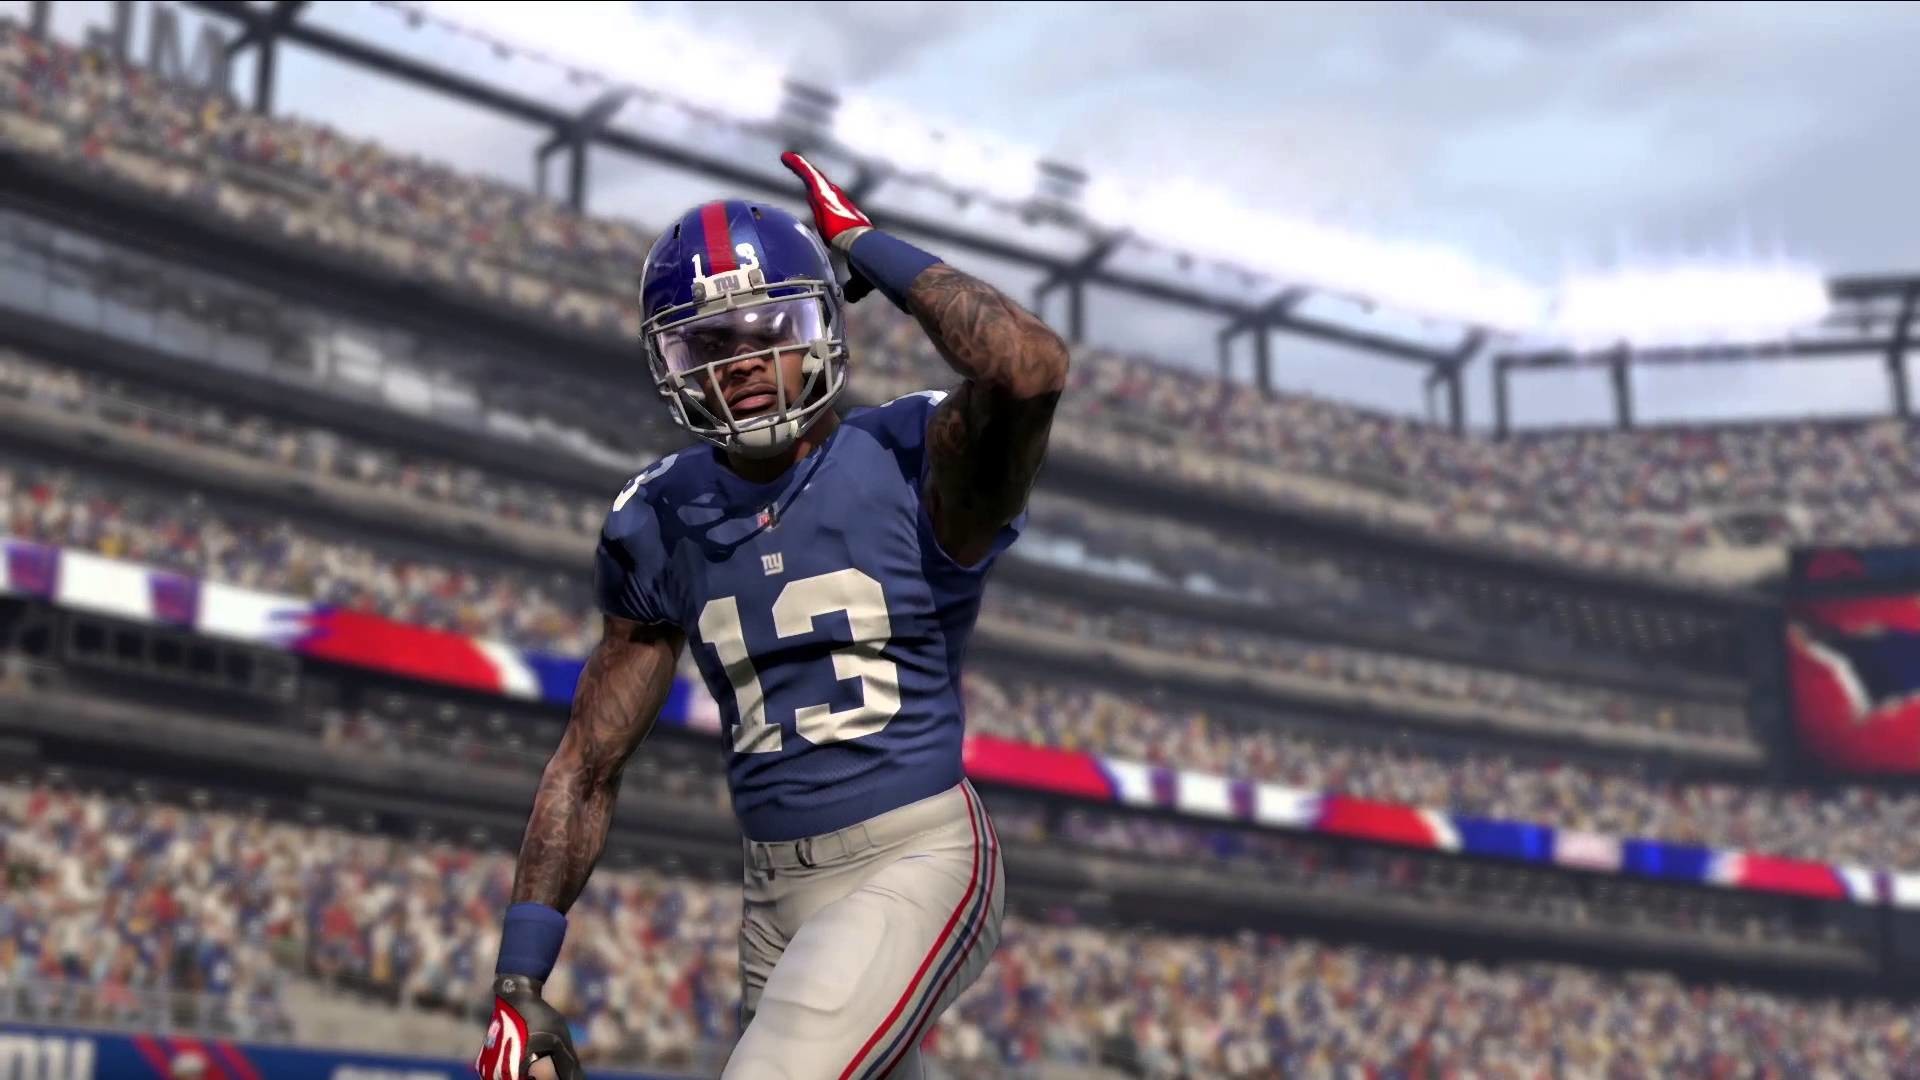 1920x1080 Madden NFL 16 HD Wallpaper | Background Image |  | ID:613102 -  Wallpaper Abyss